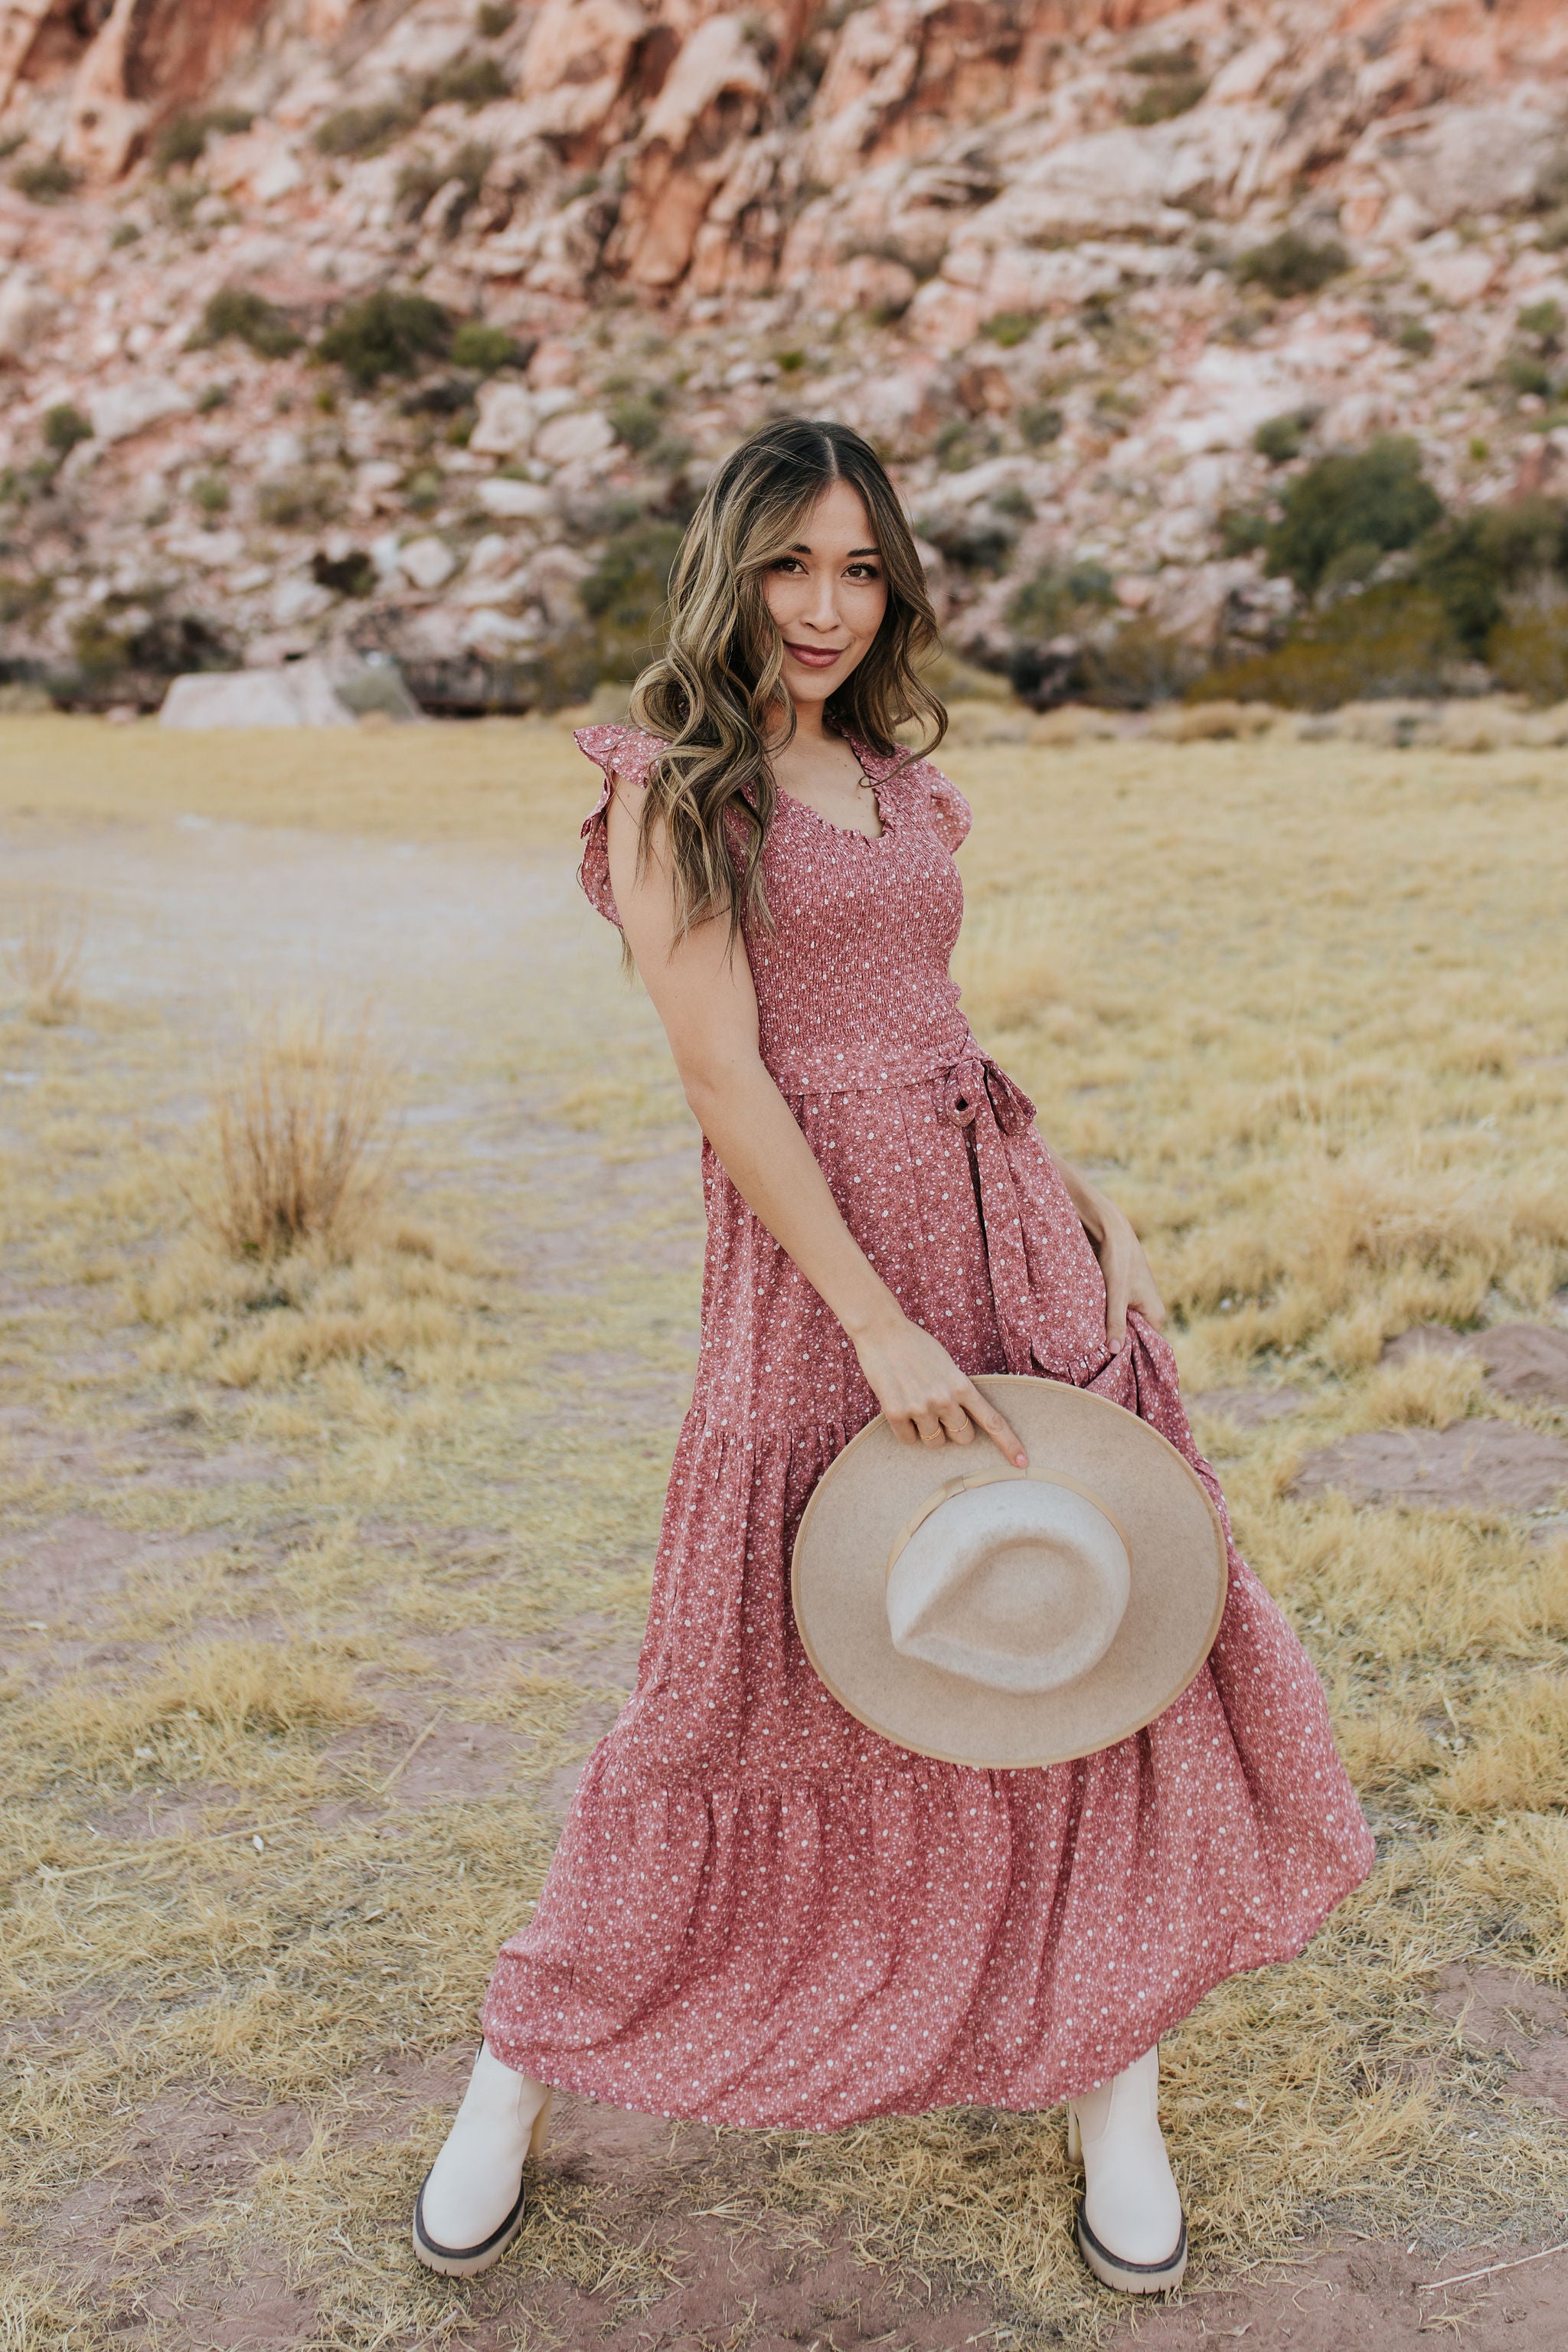 the match maker maxi dress in dusty rose